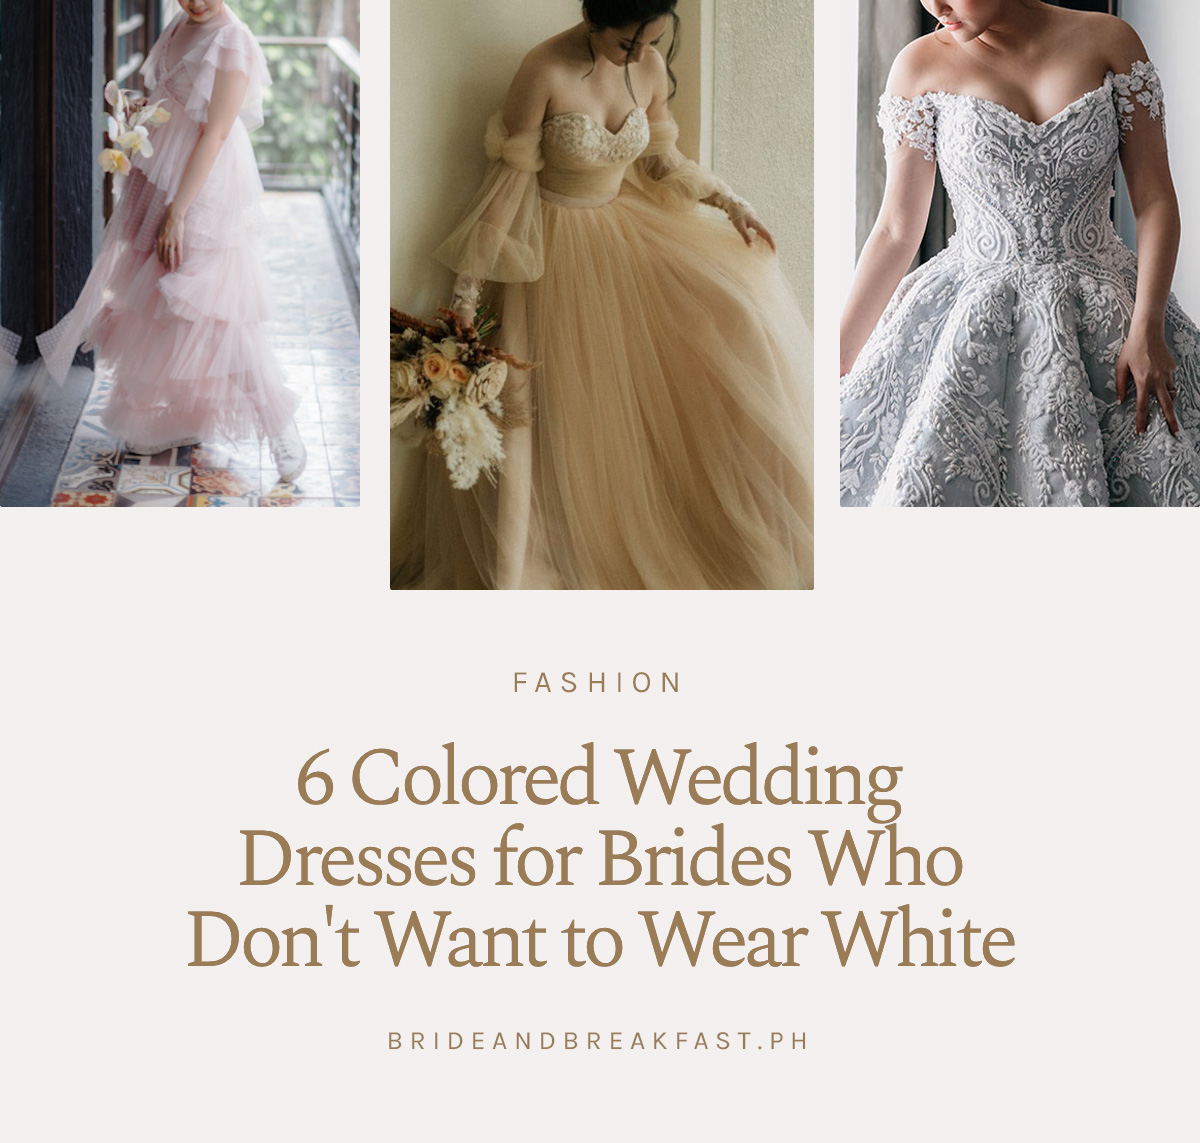 6 Colored Wedding Dresses for Brides Who Don't Want to Wear White